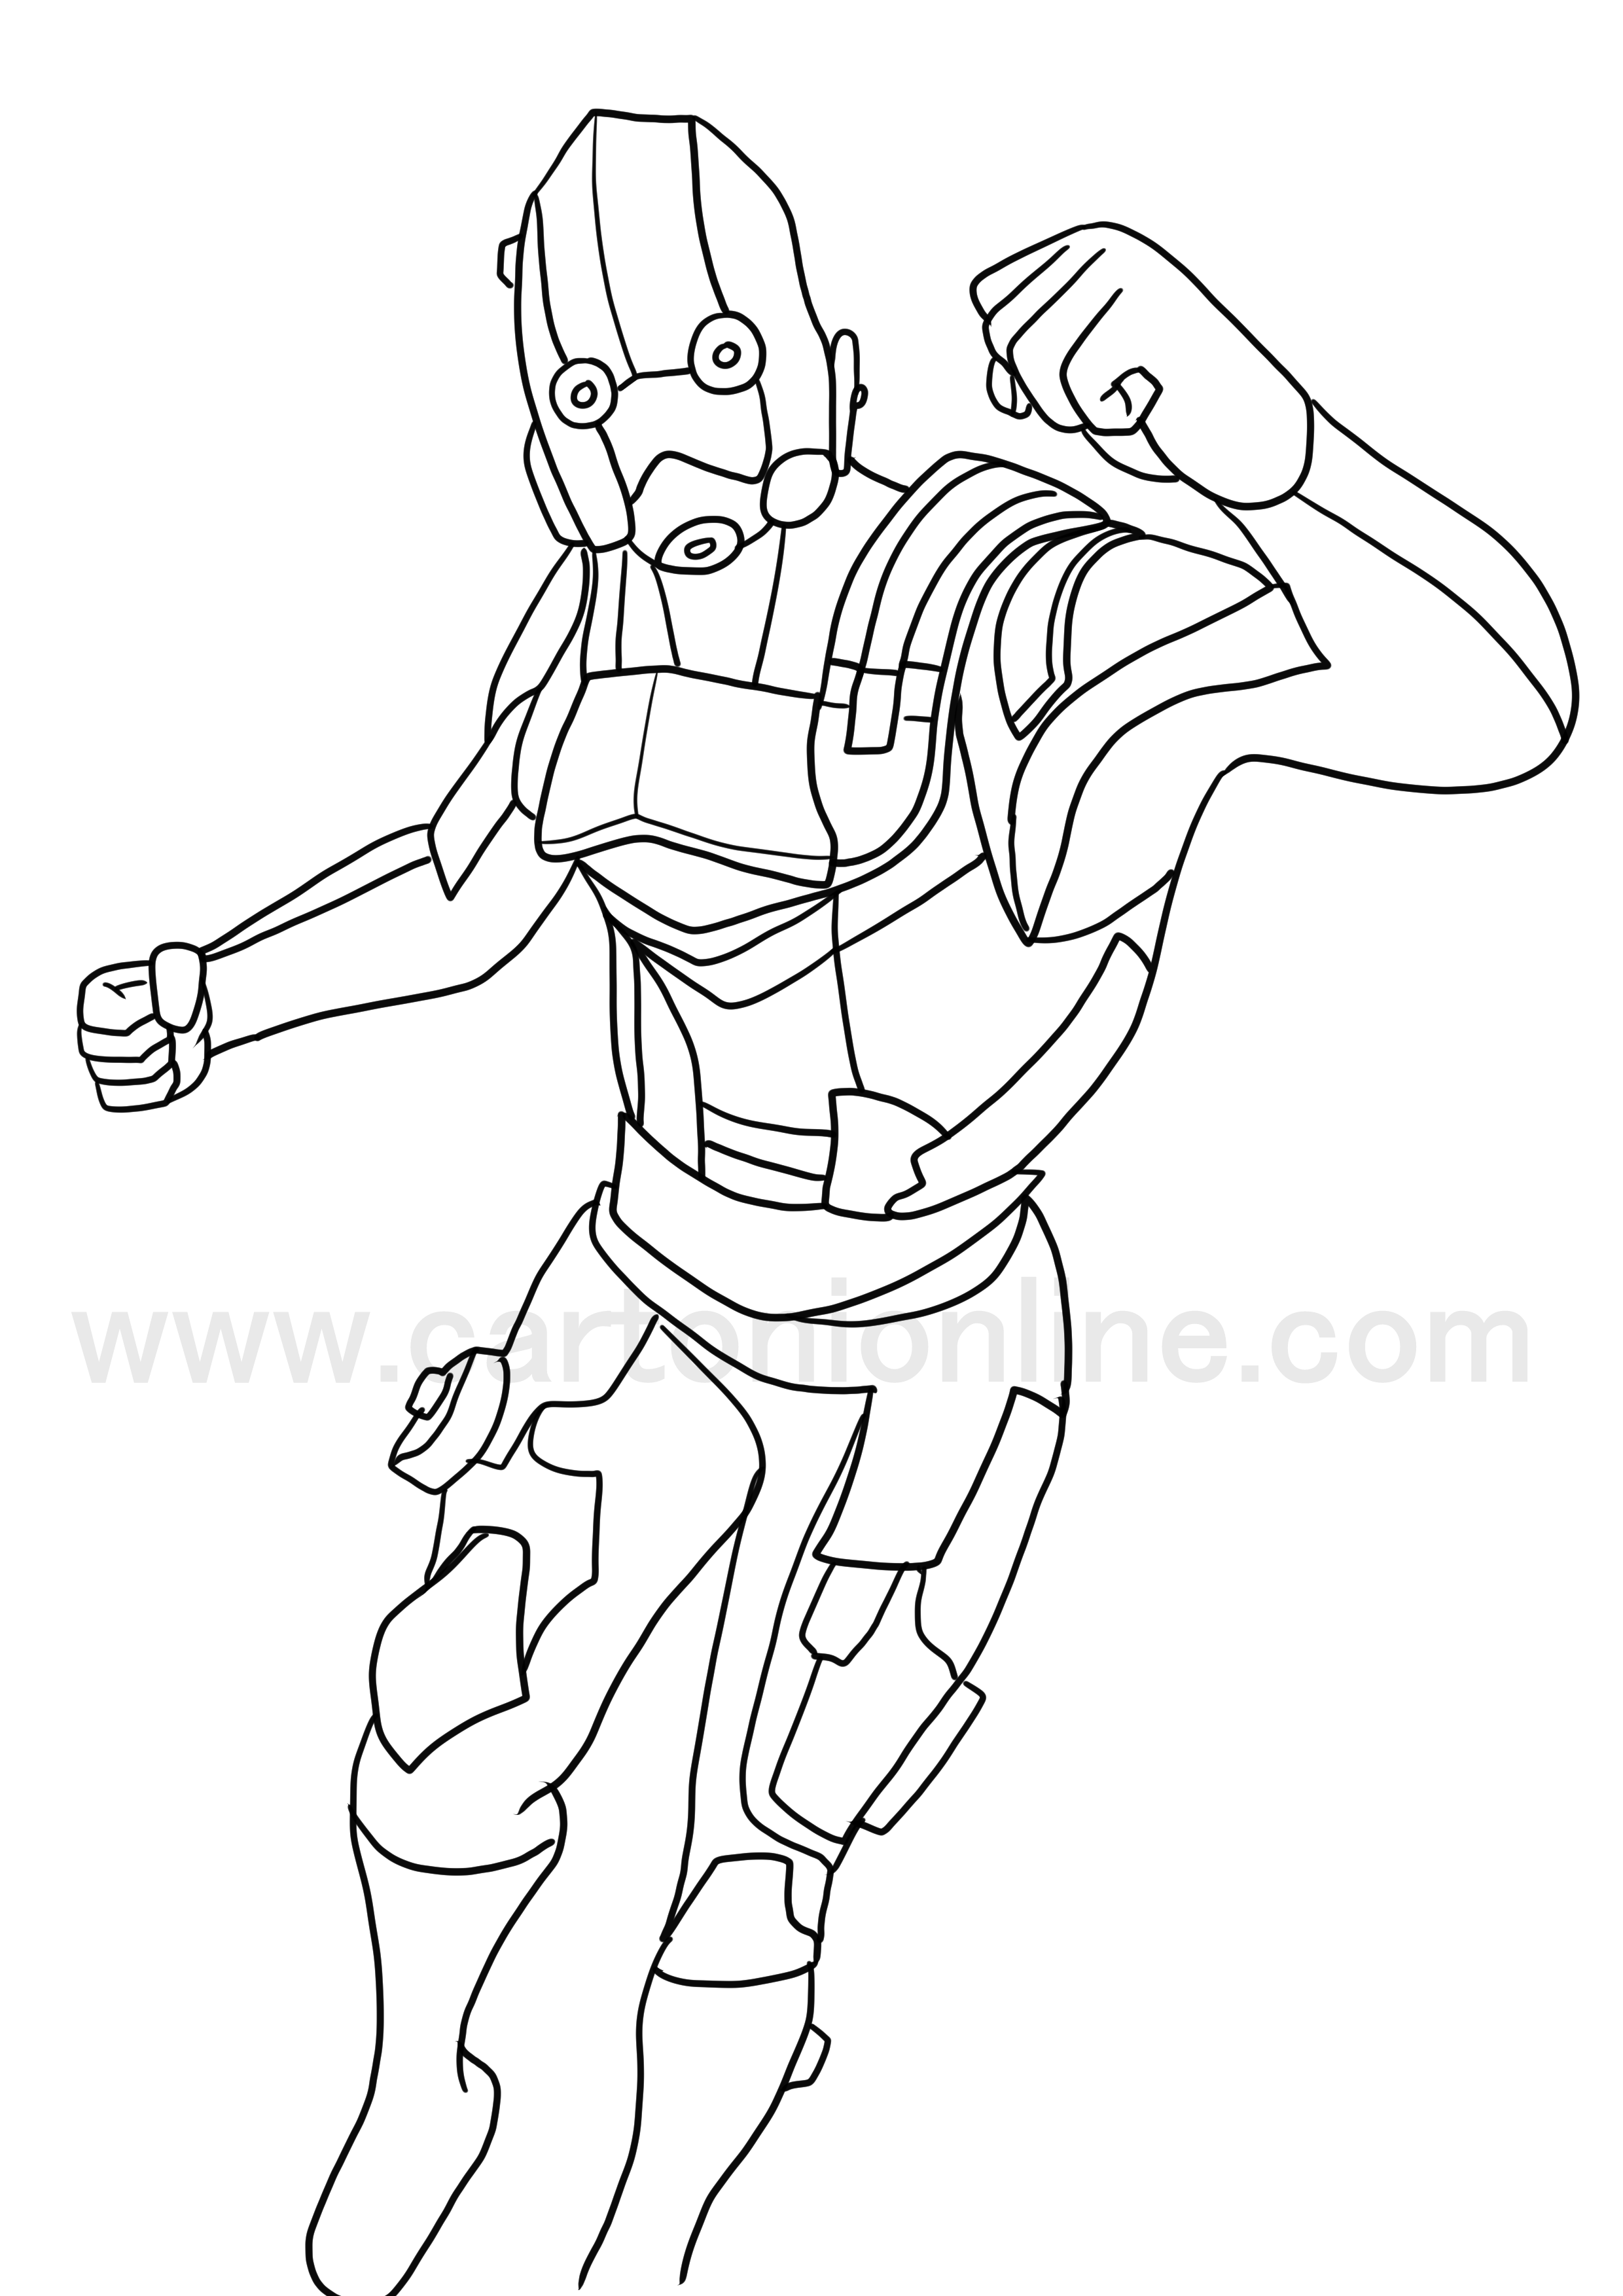 Dark Vertex from Fortnite coloring pages to print and coloring